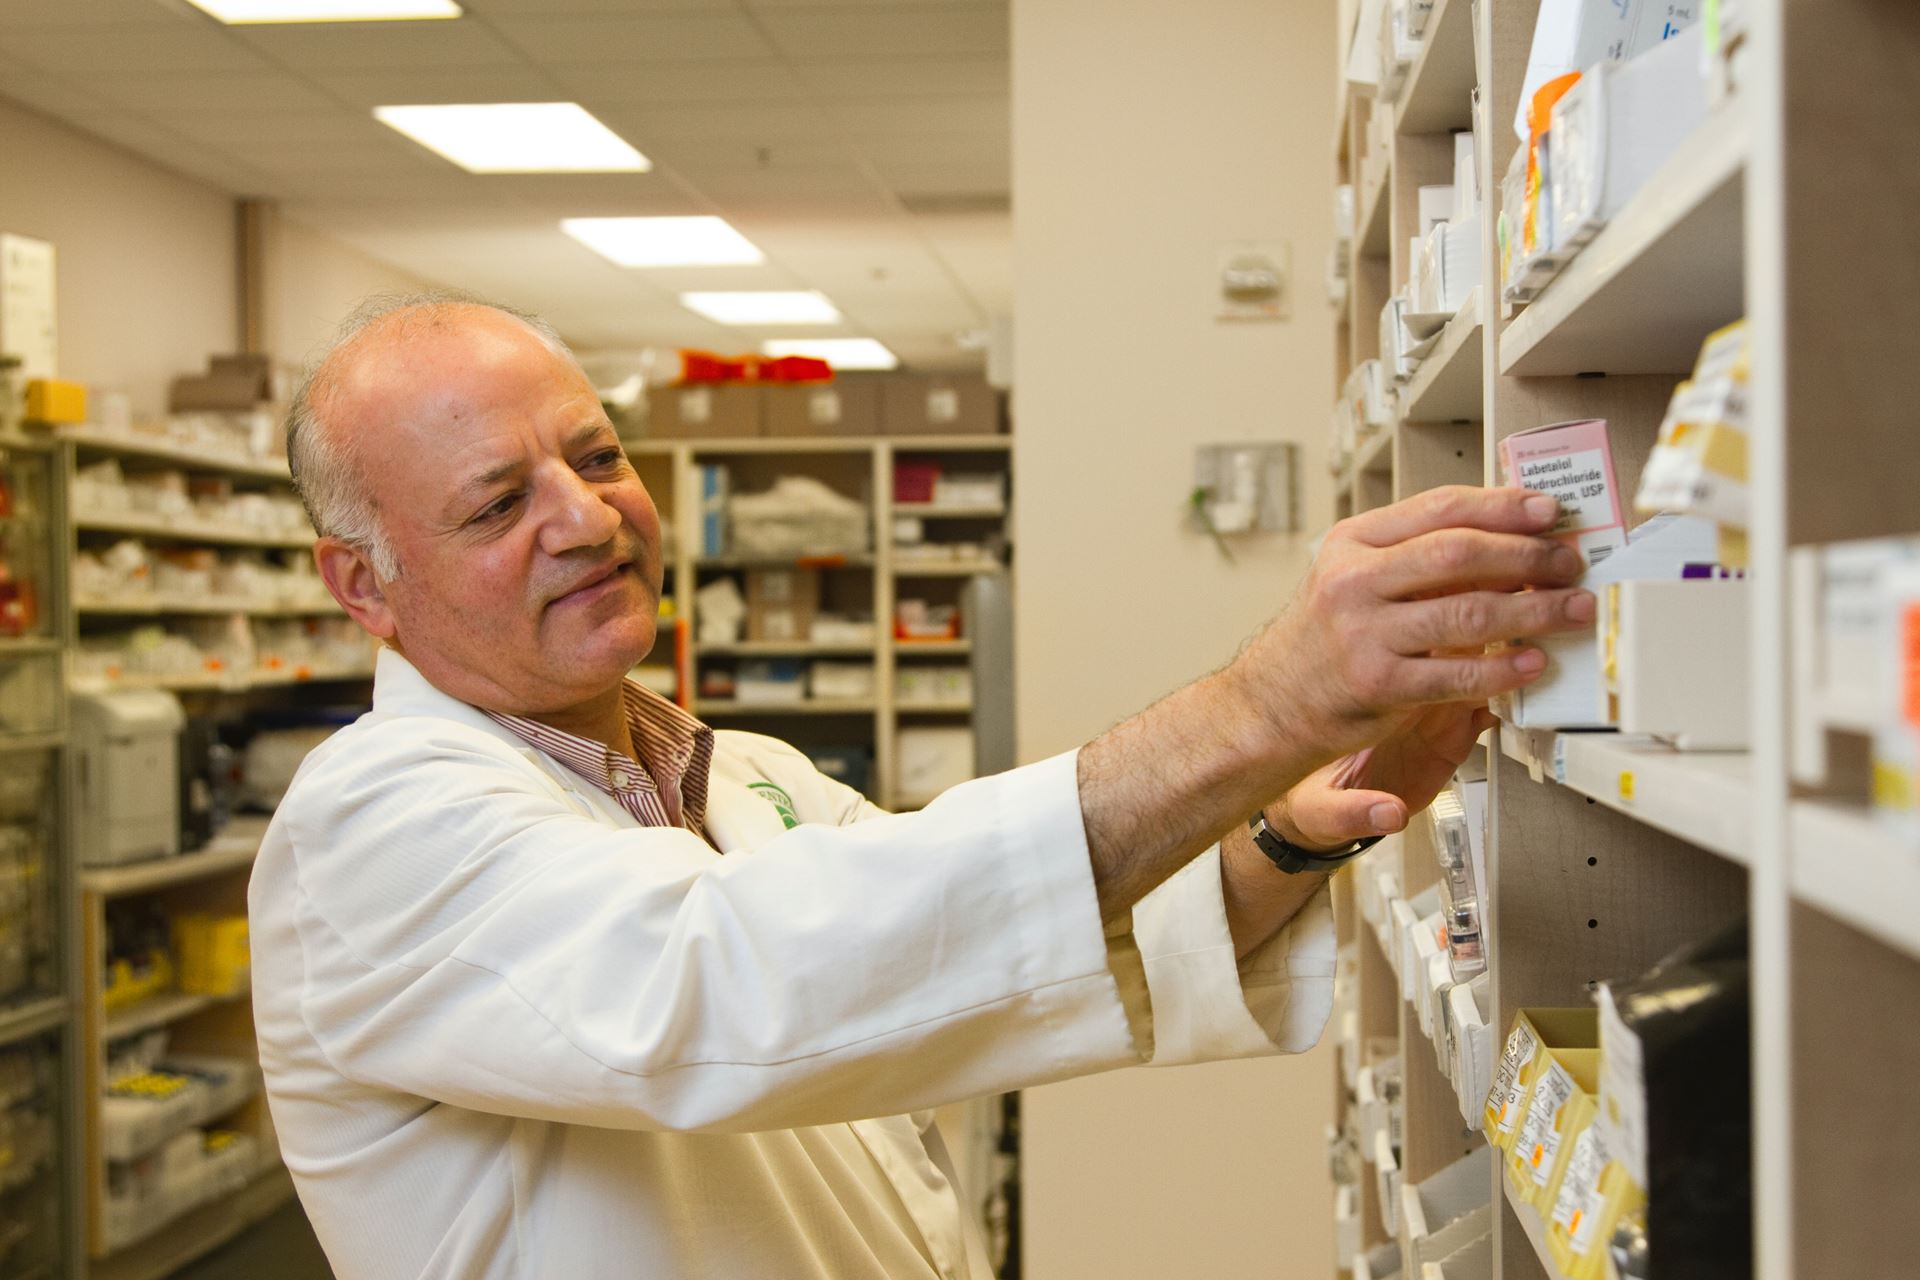 a man working in a pharmacy looking at medication